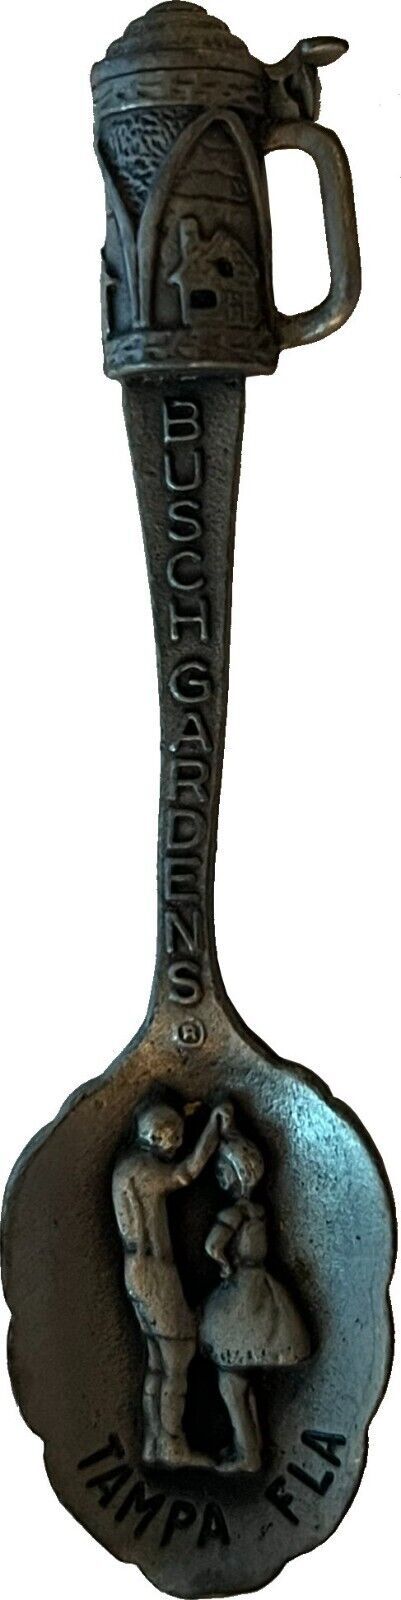 Primary image for Vintage Souvenir Spoon US Collectible - Pewter Busch Gardens Stein Tampa Florida